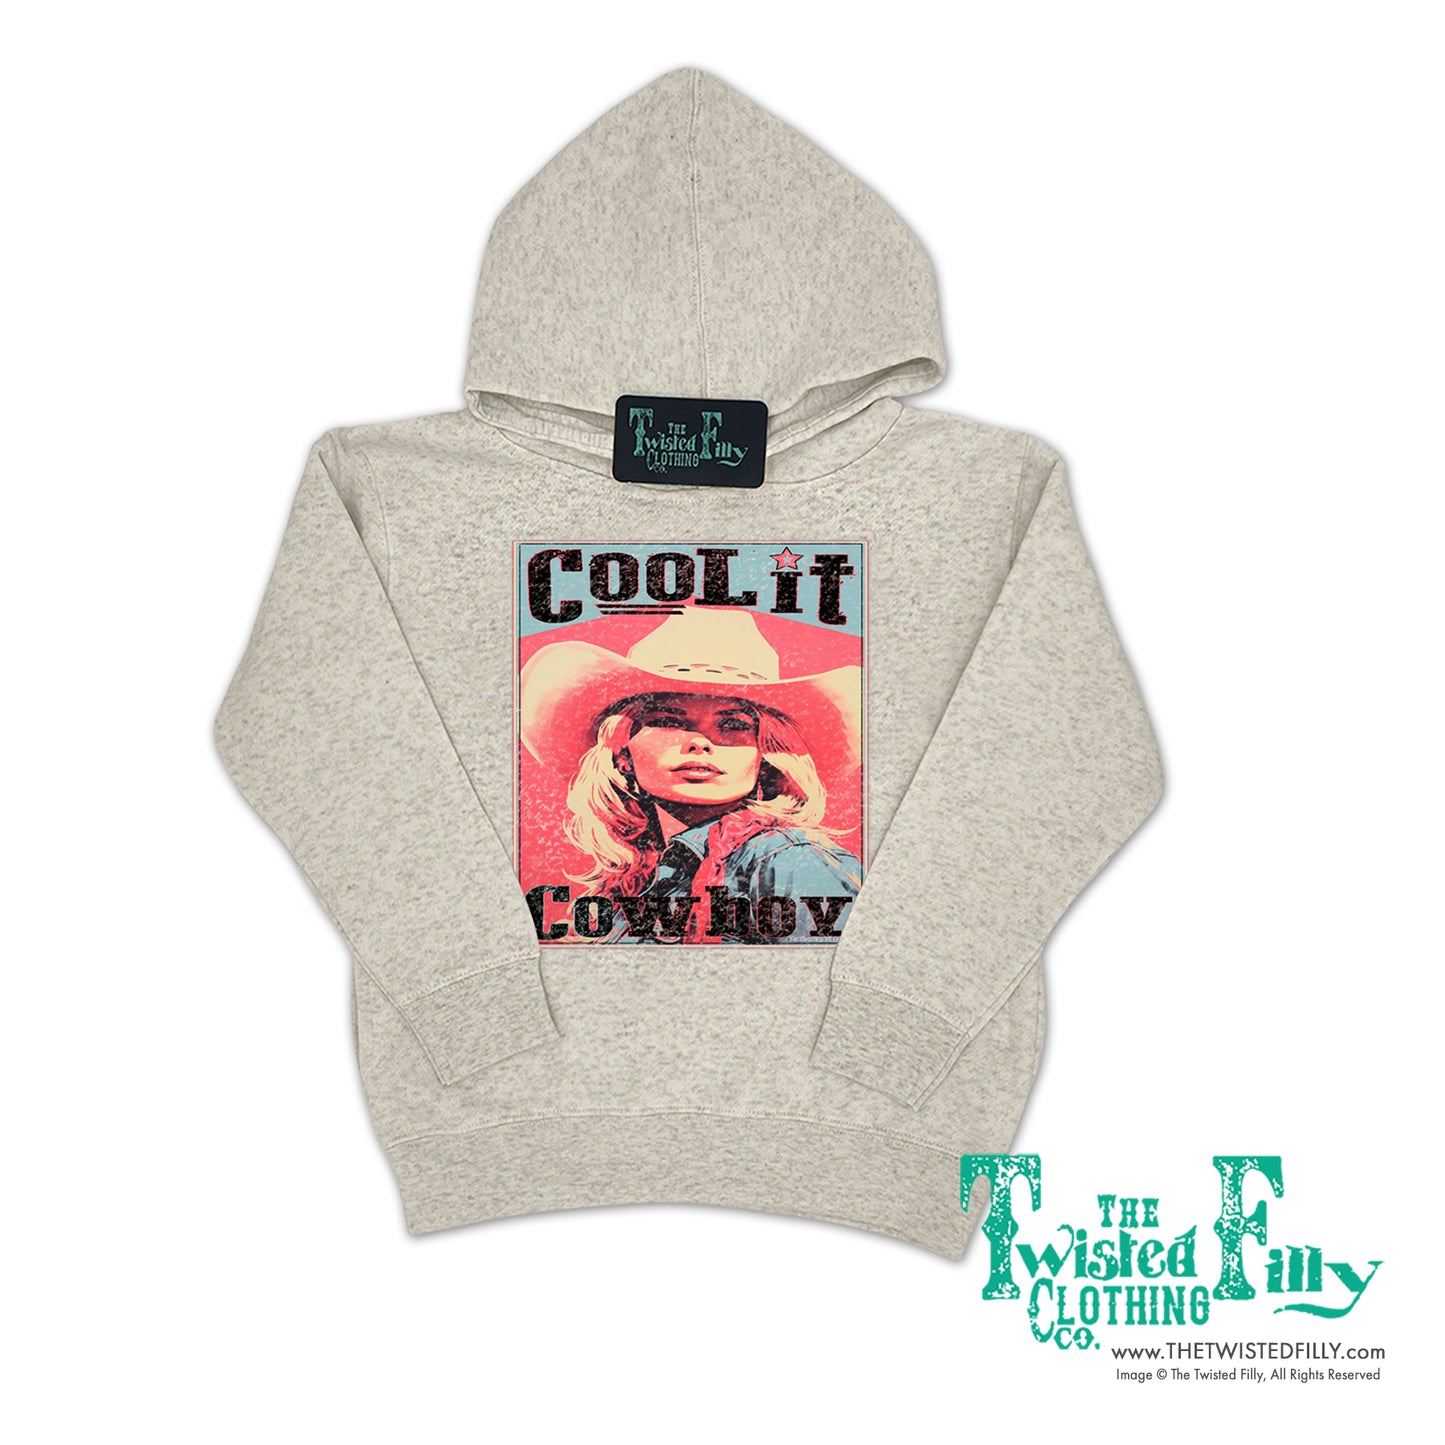 Cool It Cowboy - Girls Youth Hoodie - Assorted Colors